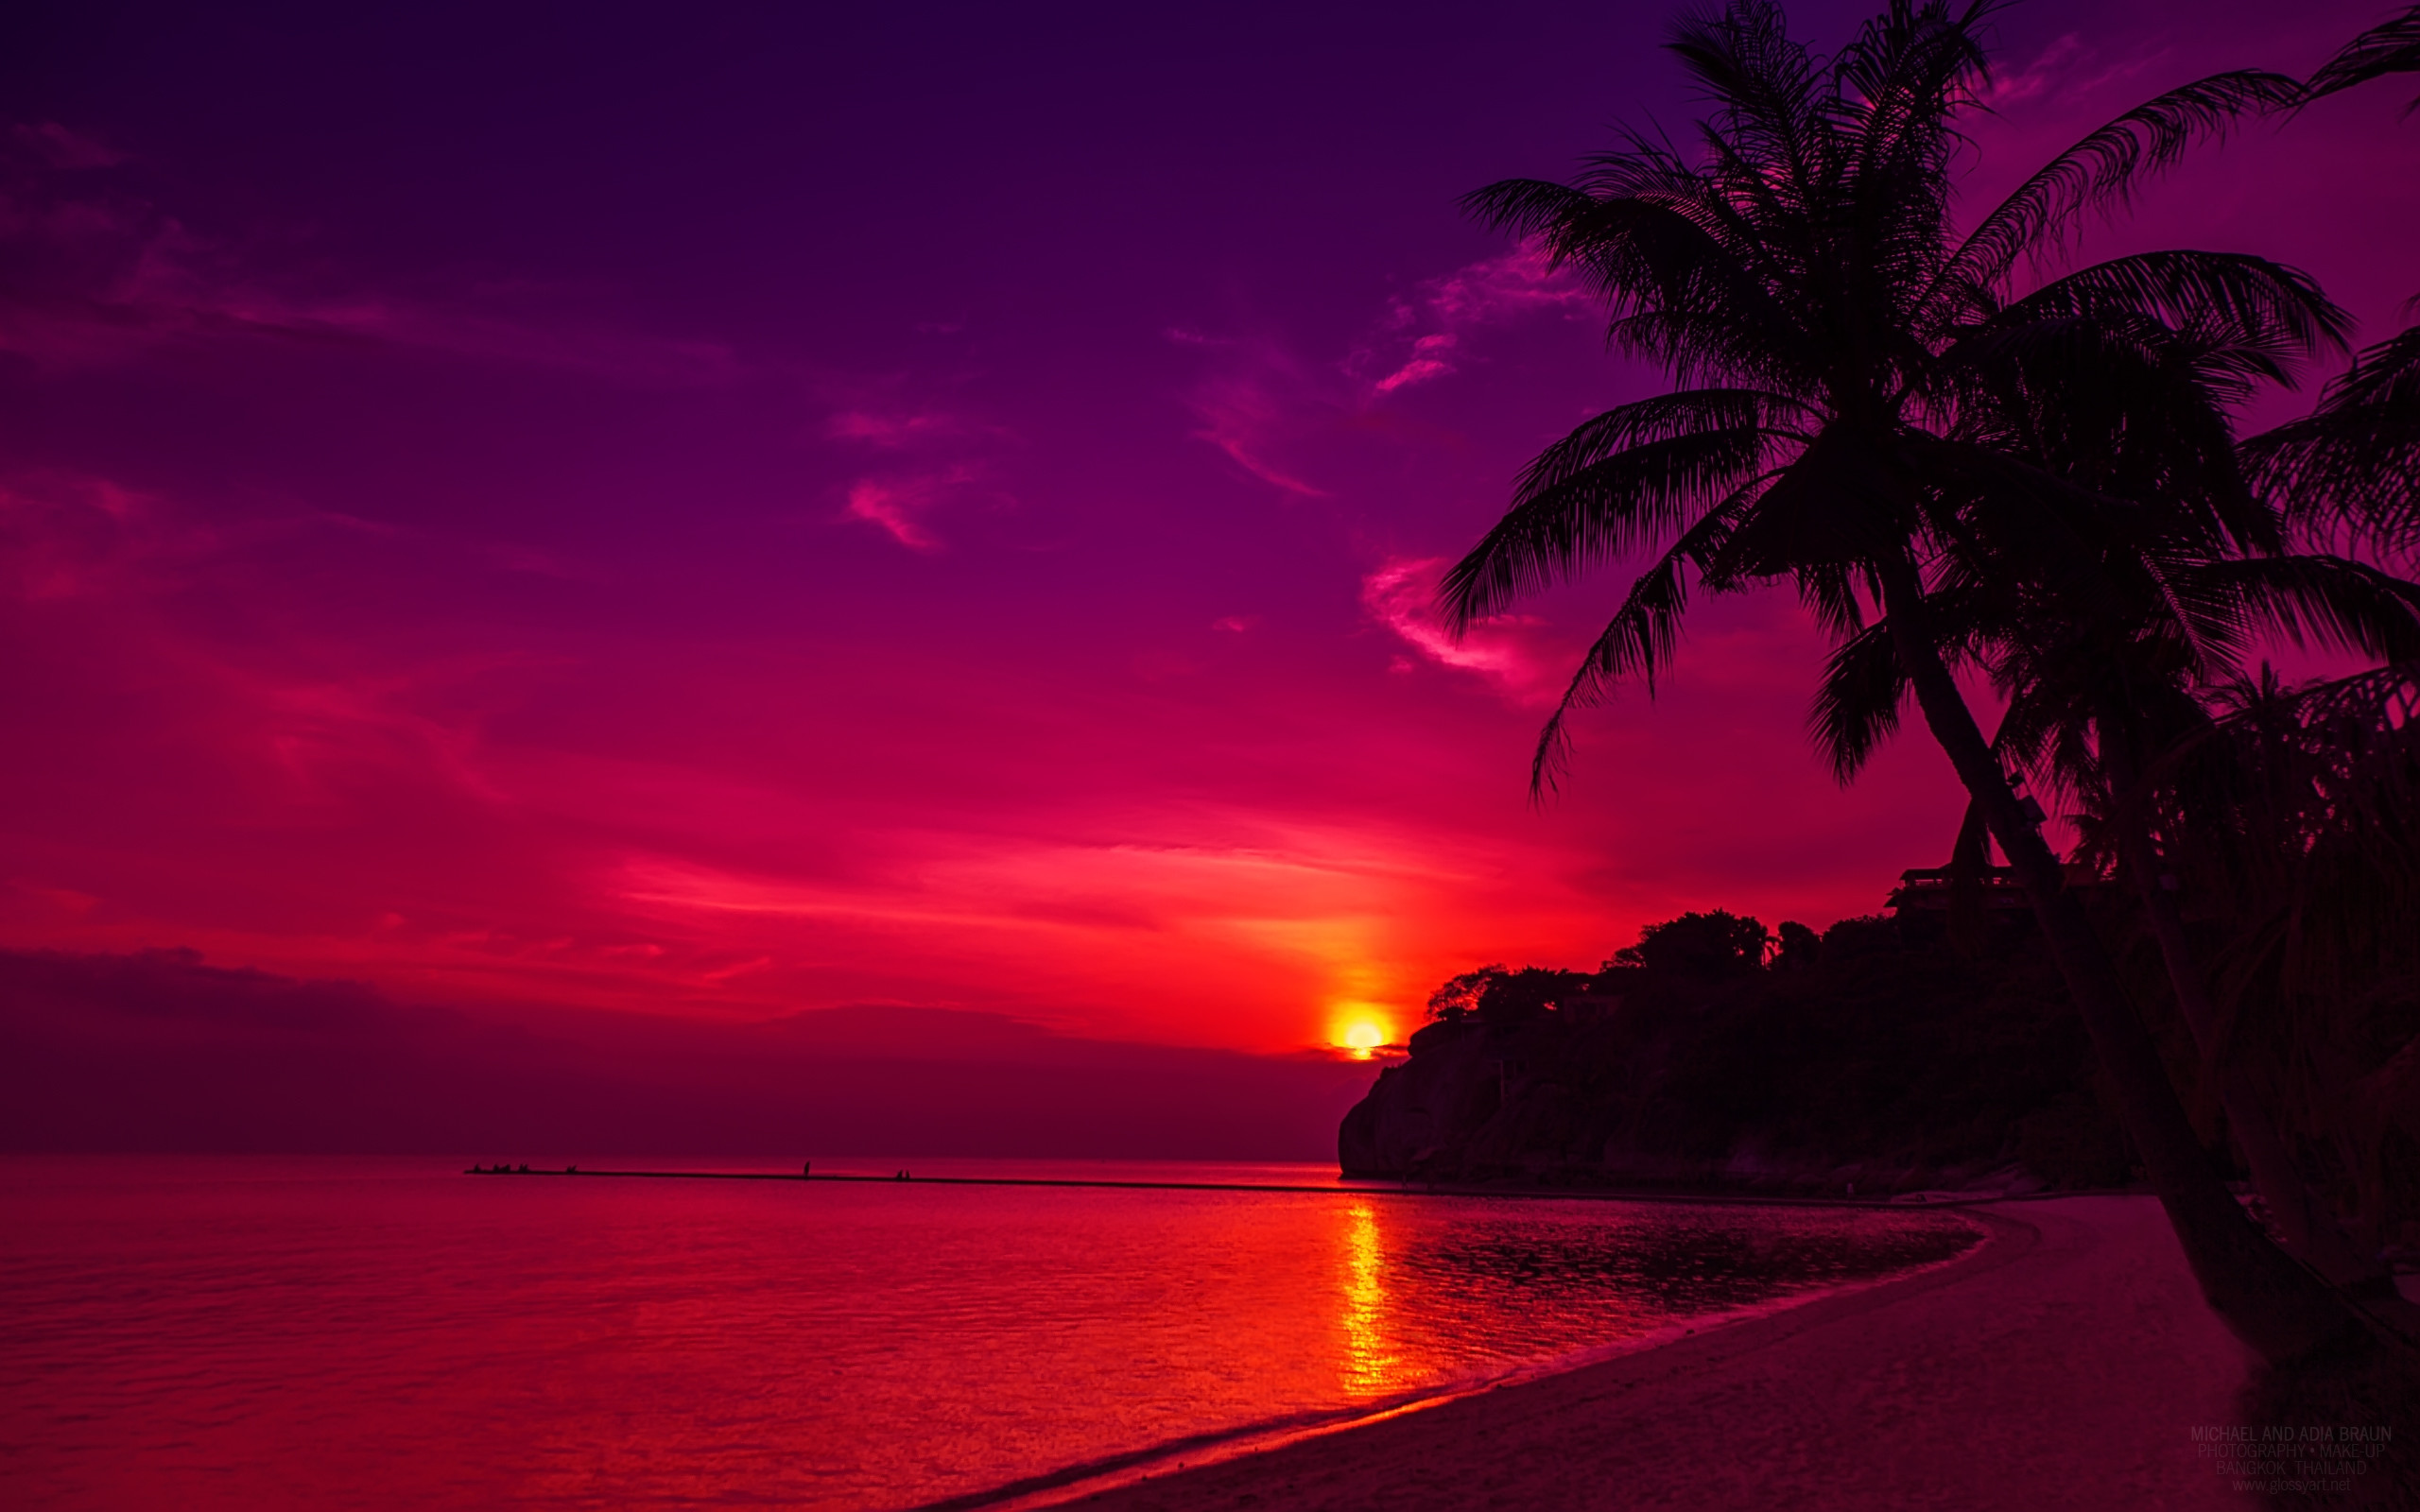 Tropical Island Sunset Wallpaper the best 56 images in 2018